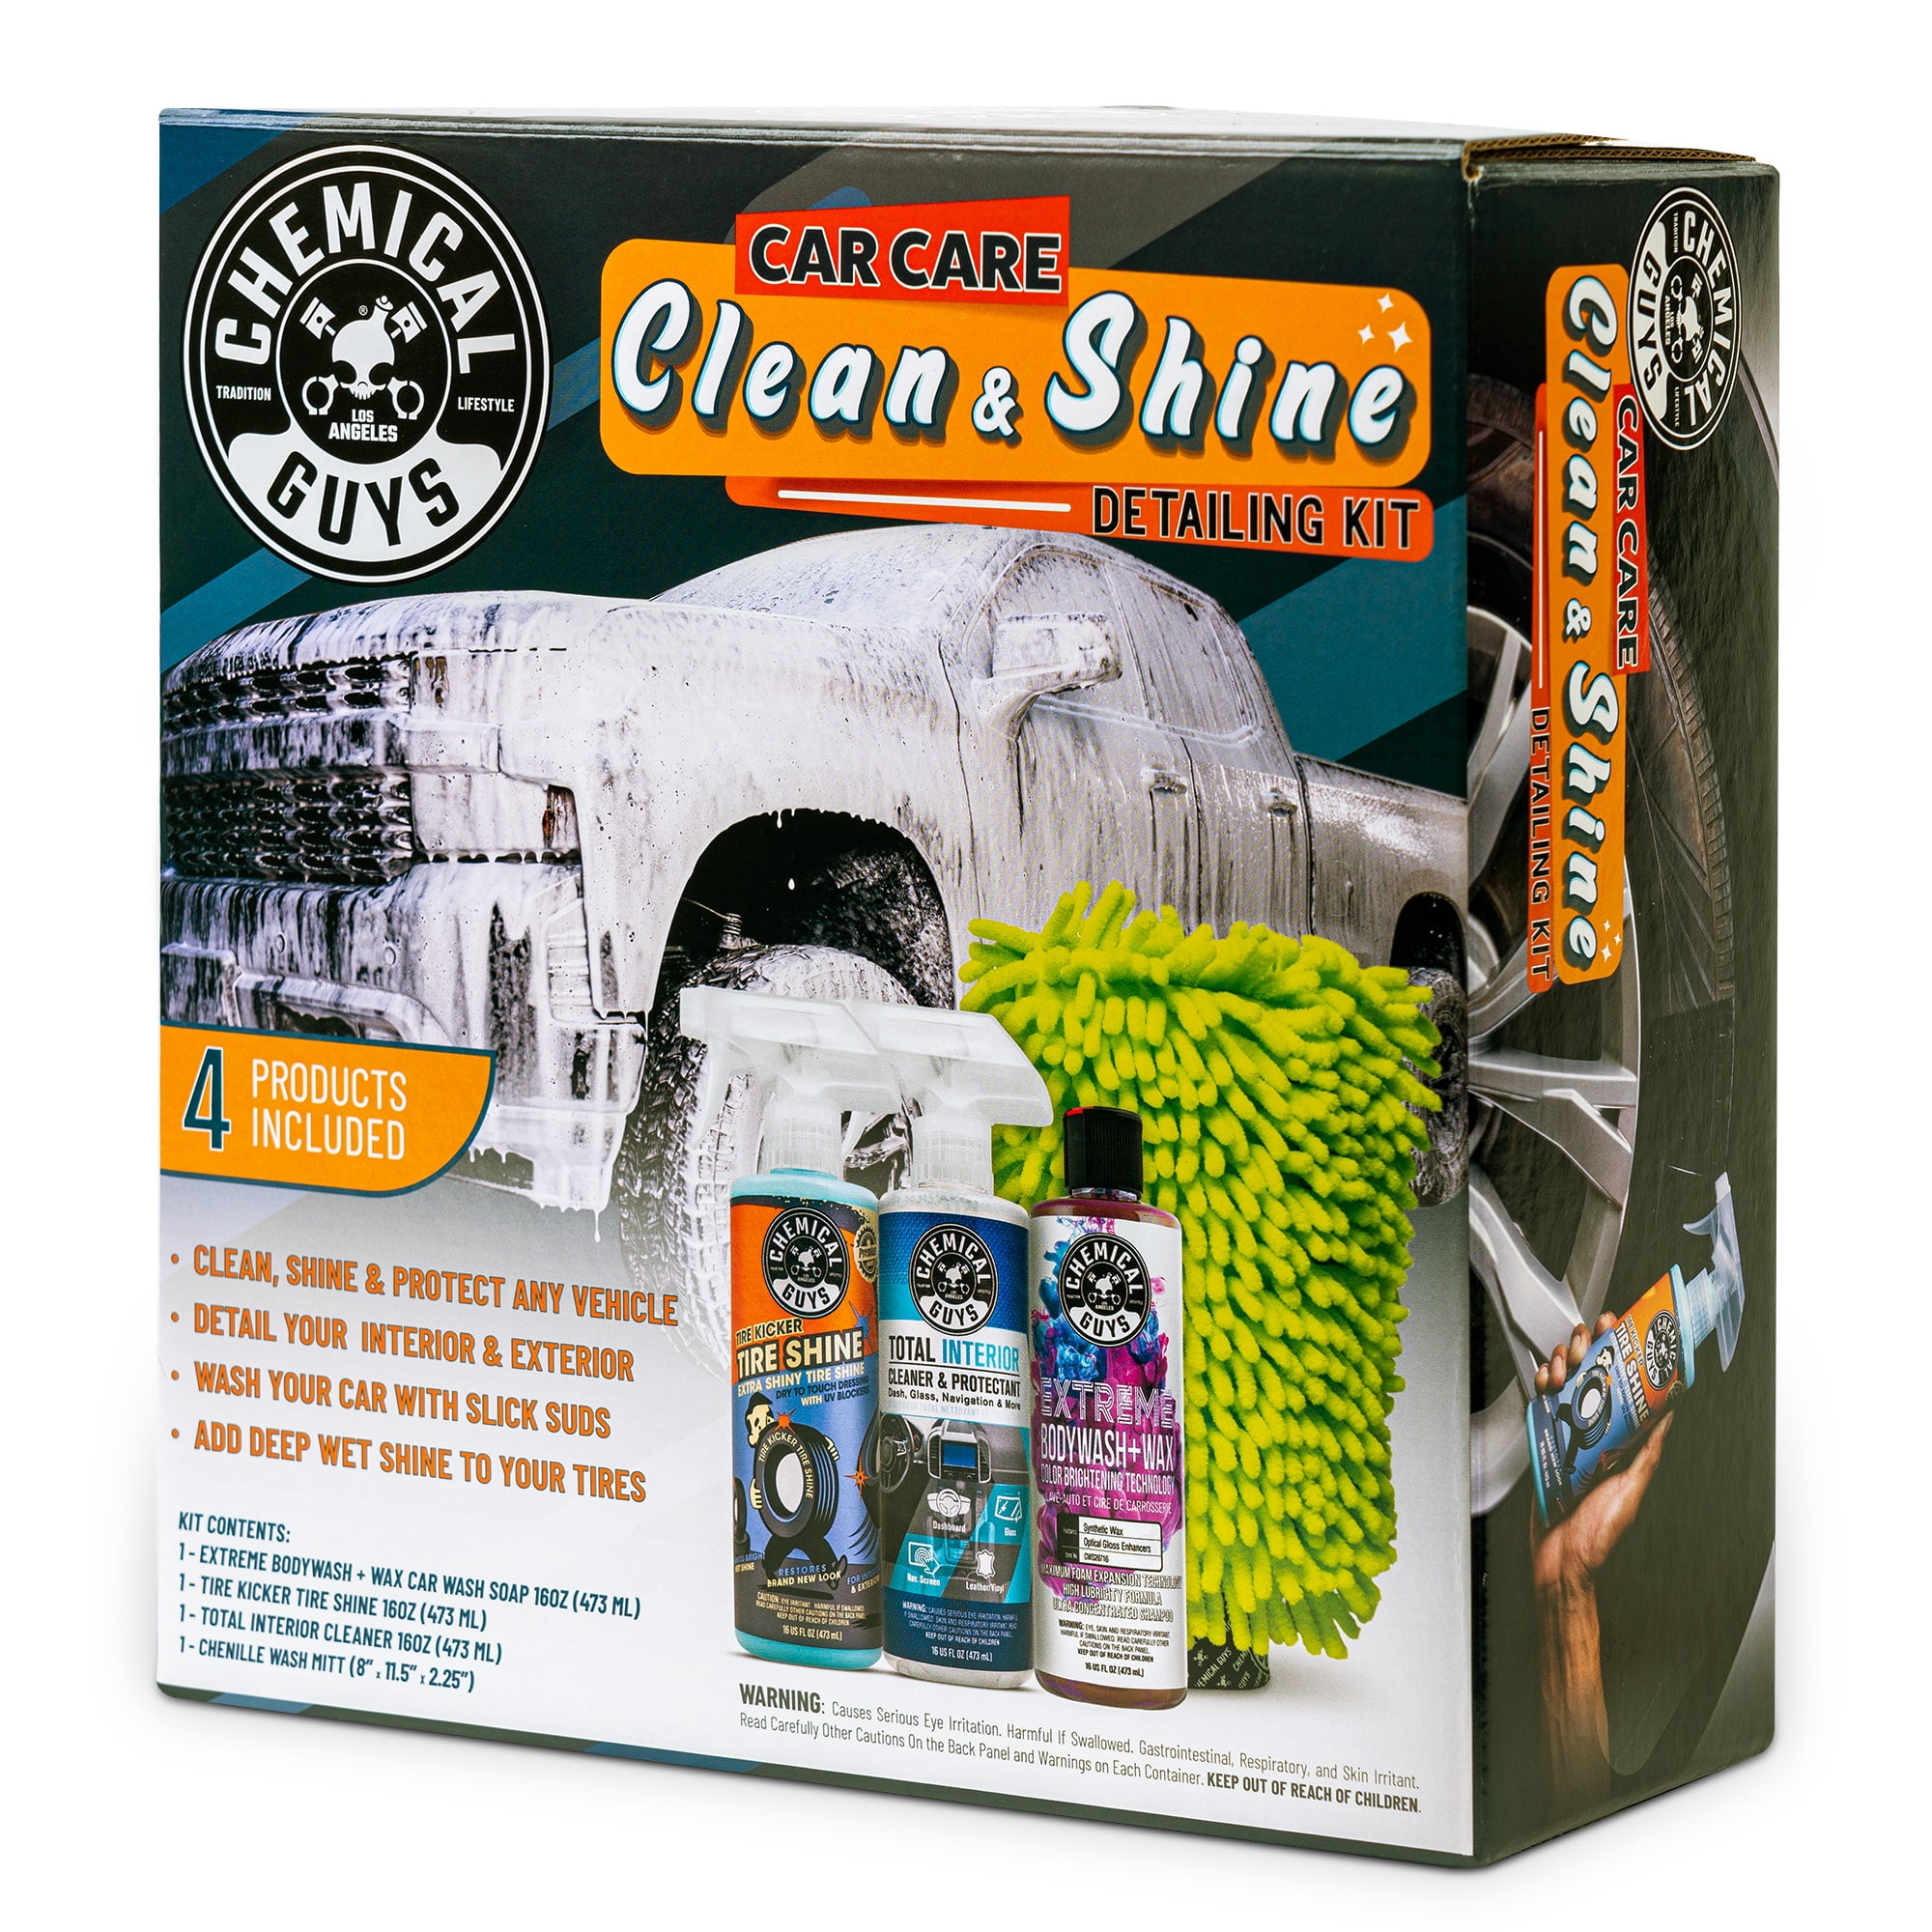 Clean And Shiny - Check out the latest items from the Chemical